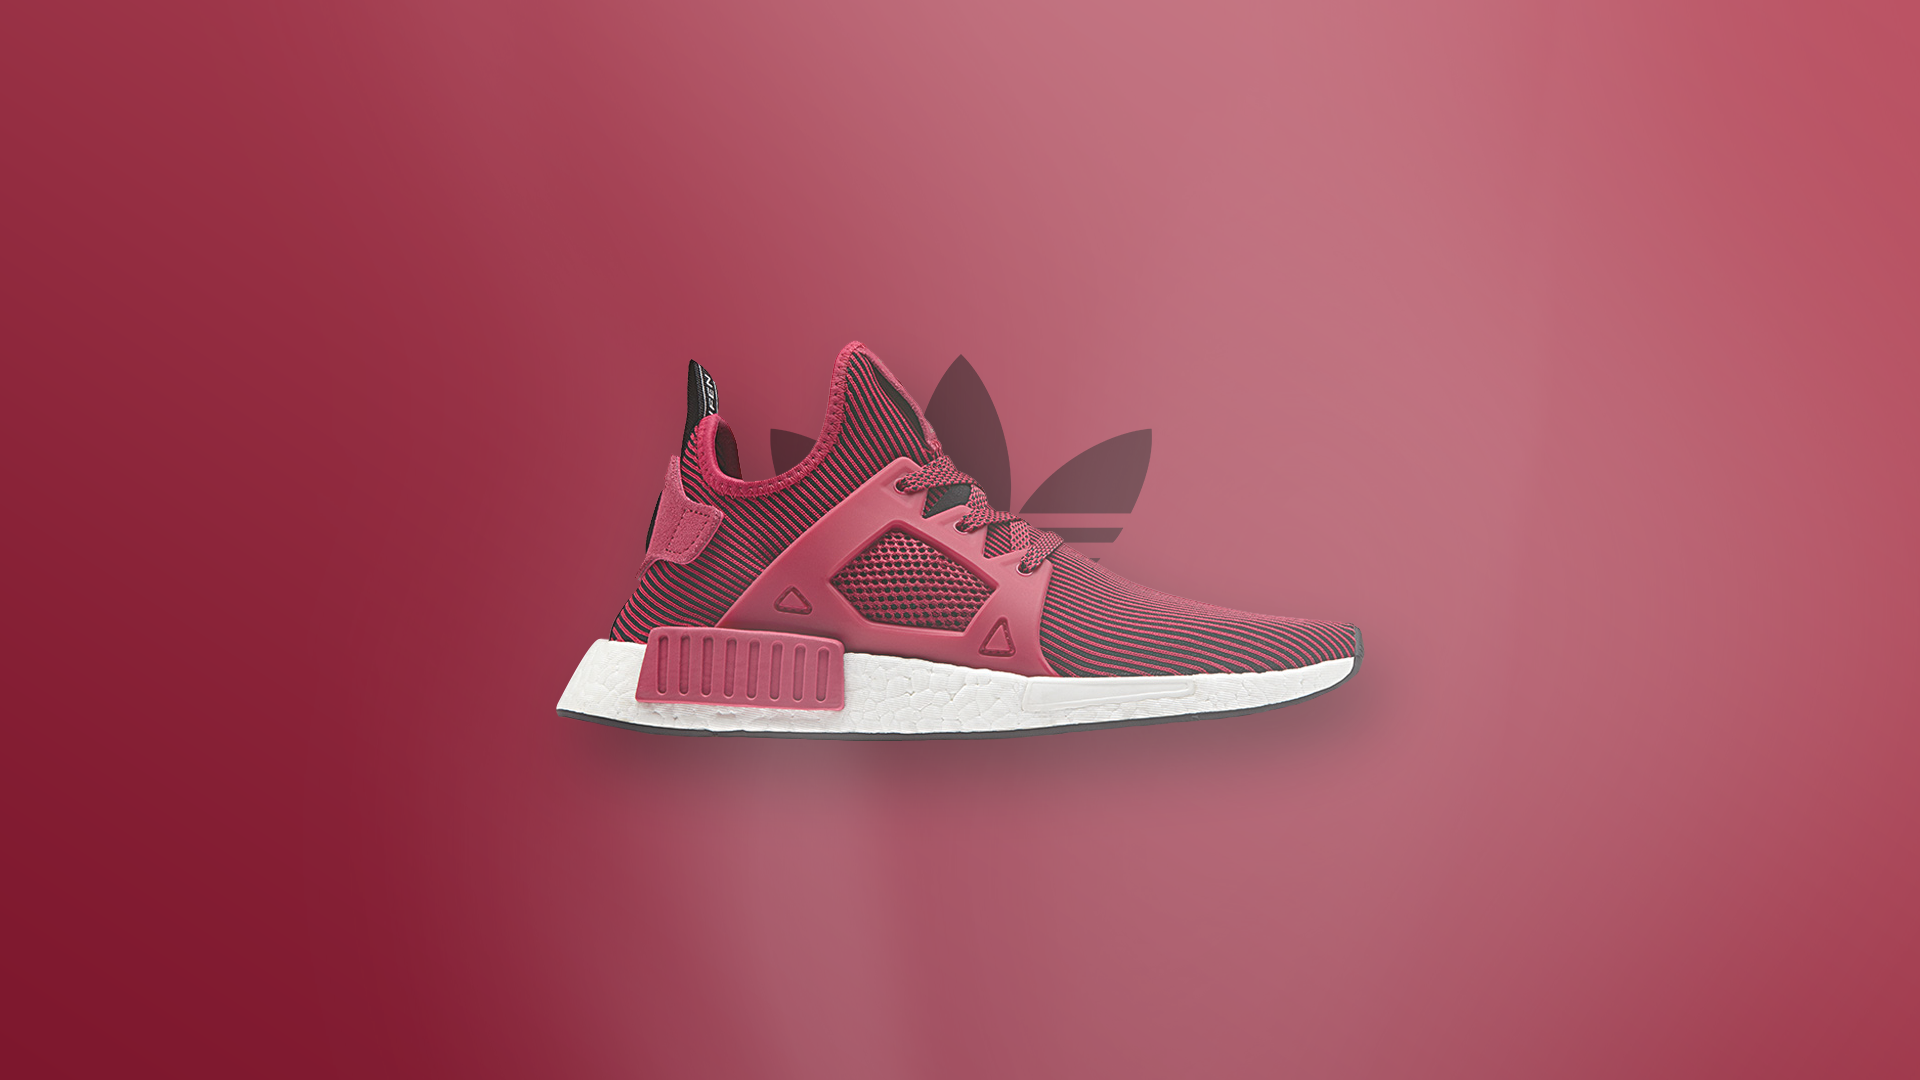 General 1920x1080 Adidas shoes pink shoes red shoes simple background red background gradient